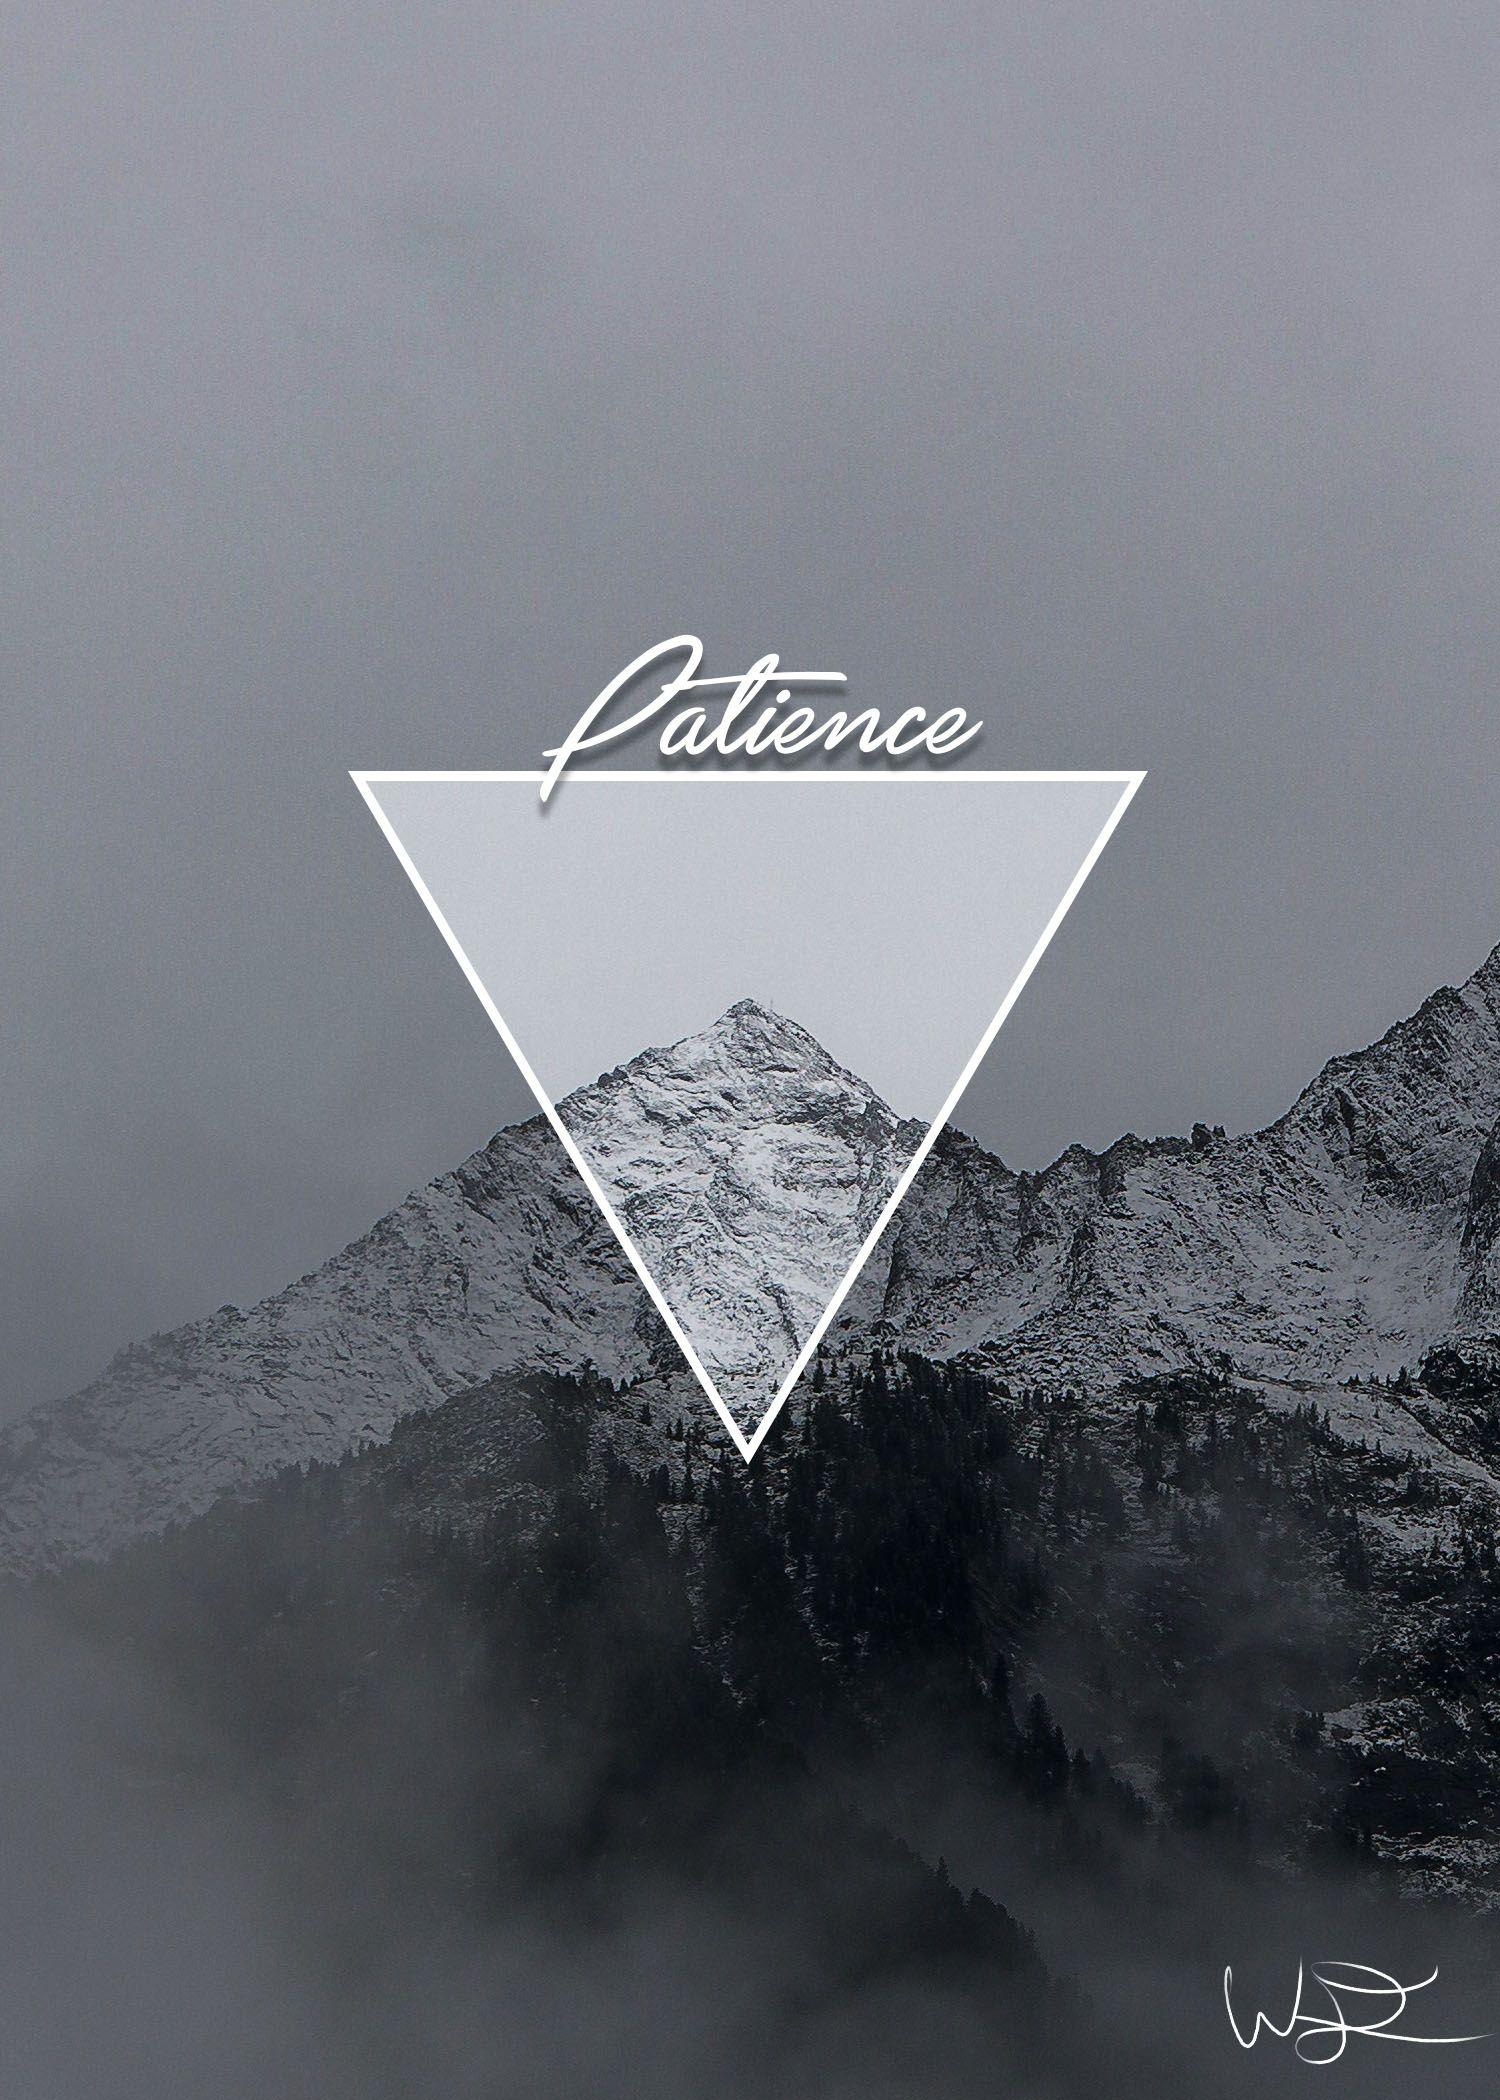 Patience Wallpaper for iPhone or Android. iPhone